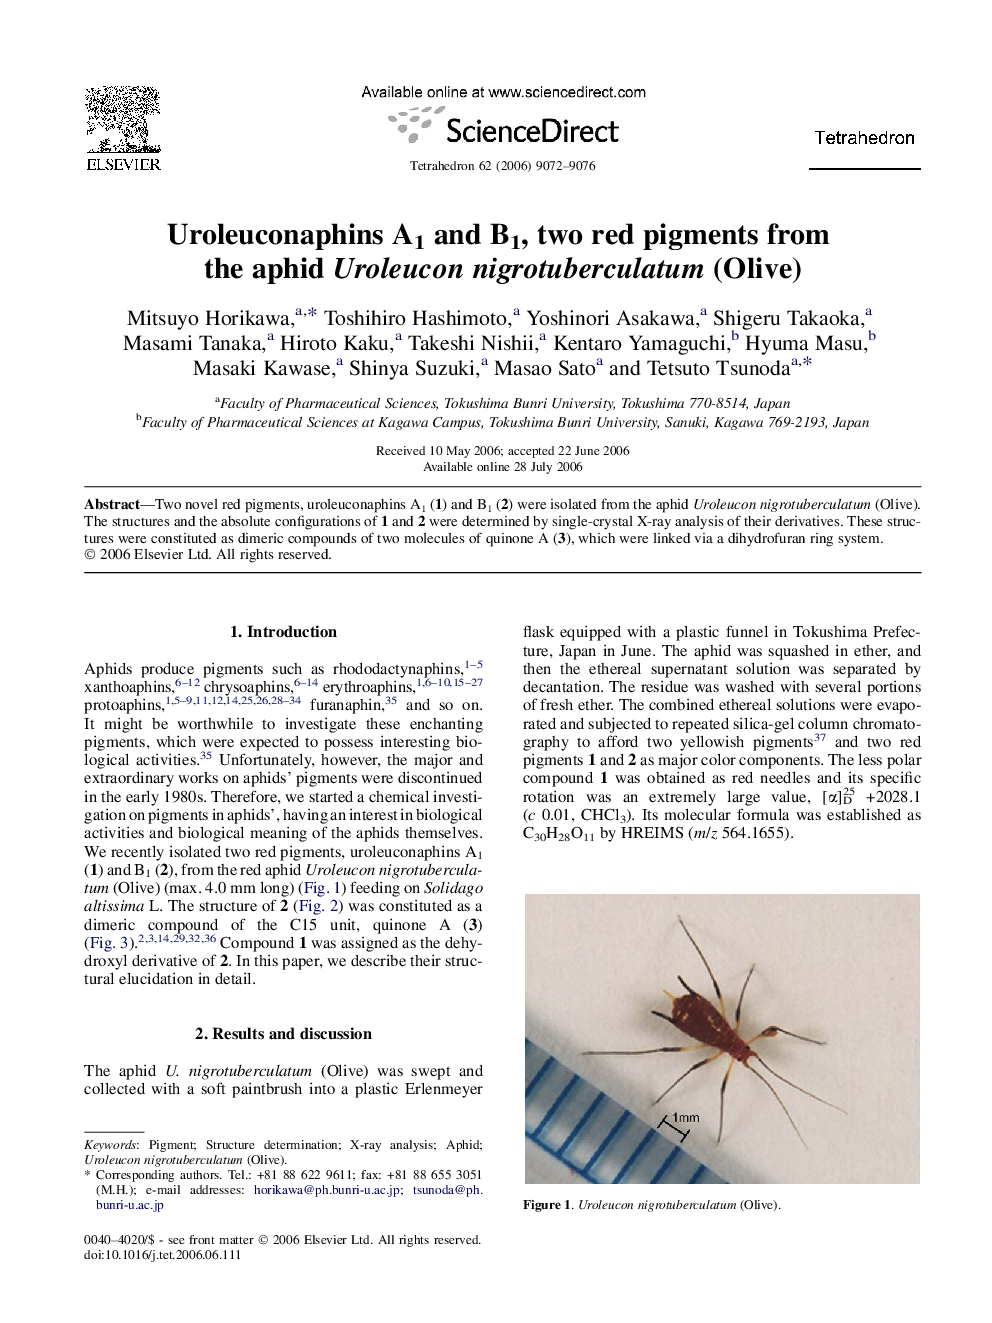 Uroleuconaphins A1 and B1, two red pigments from the aphid Uroleucon nigrotuberculatum (Olive)